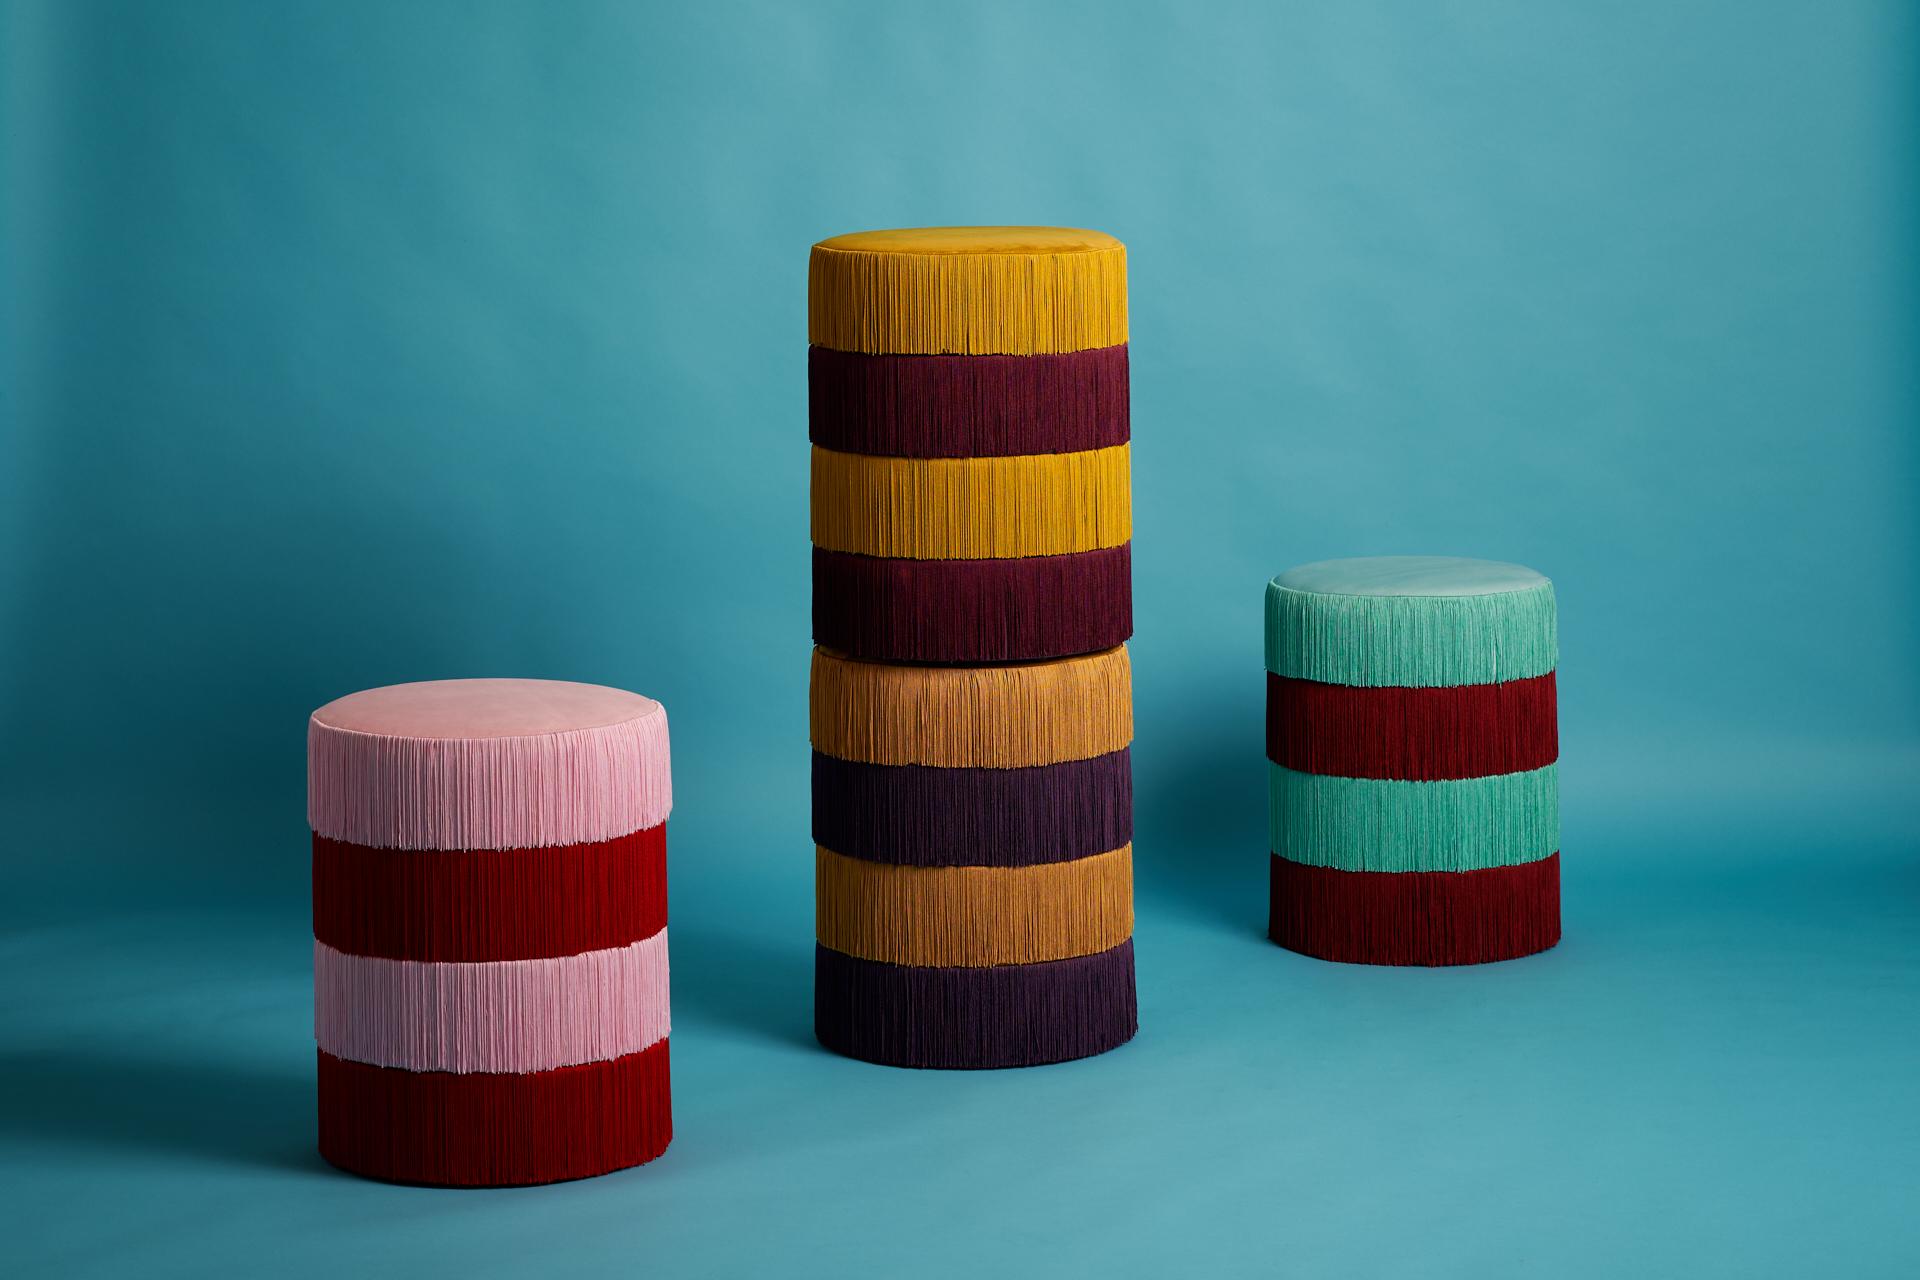 Chachachá Pouf by Houtique
Dimensions: H 45 x D 35 cm
Materials: Velvet upholstery, Wood

Art-deco style pouf with wood structure and velvet fabric. 4 modules connected by wooden sleepers, each one Formed by 2 fiber-board discs of 16mm, joined by